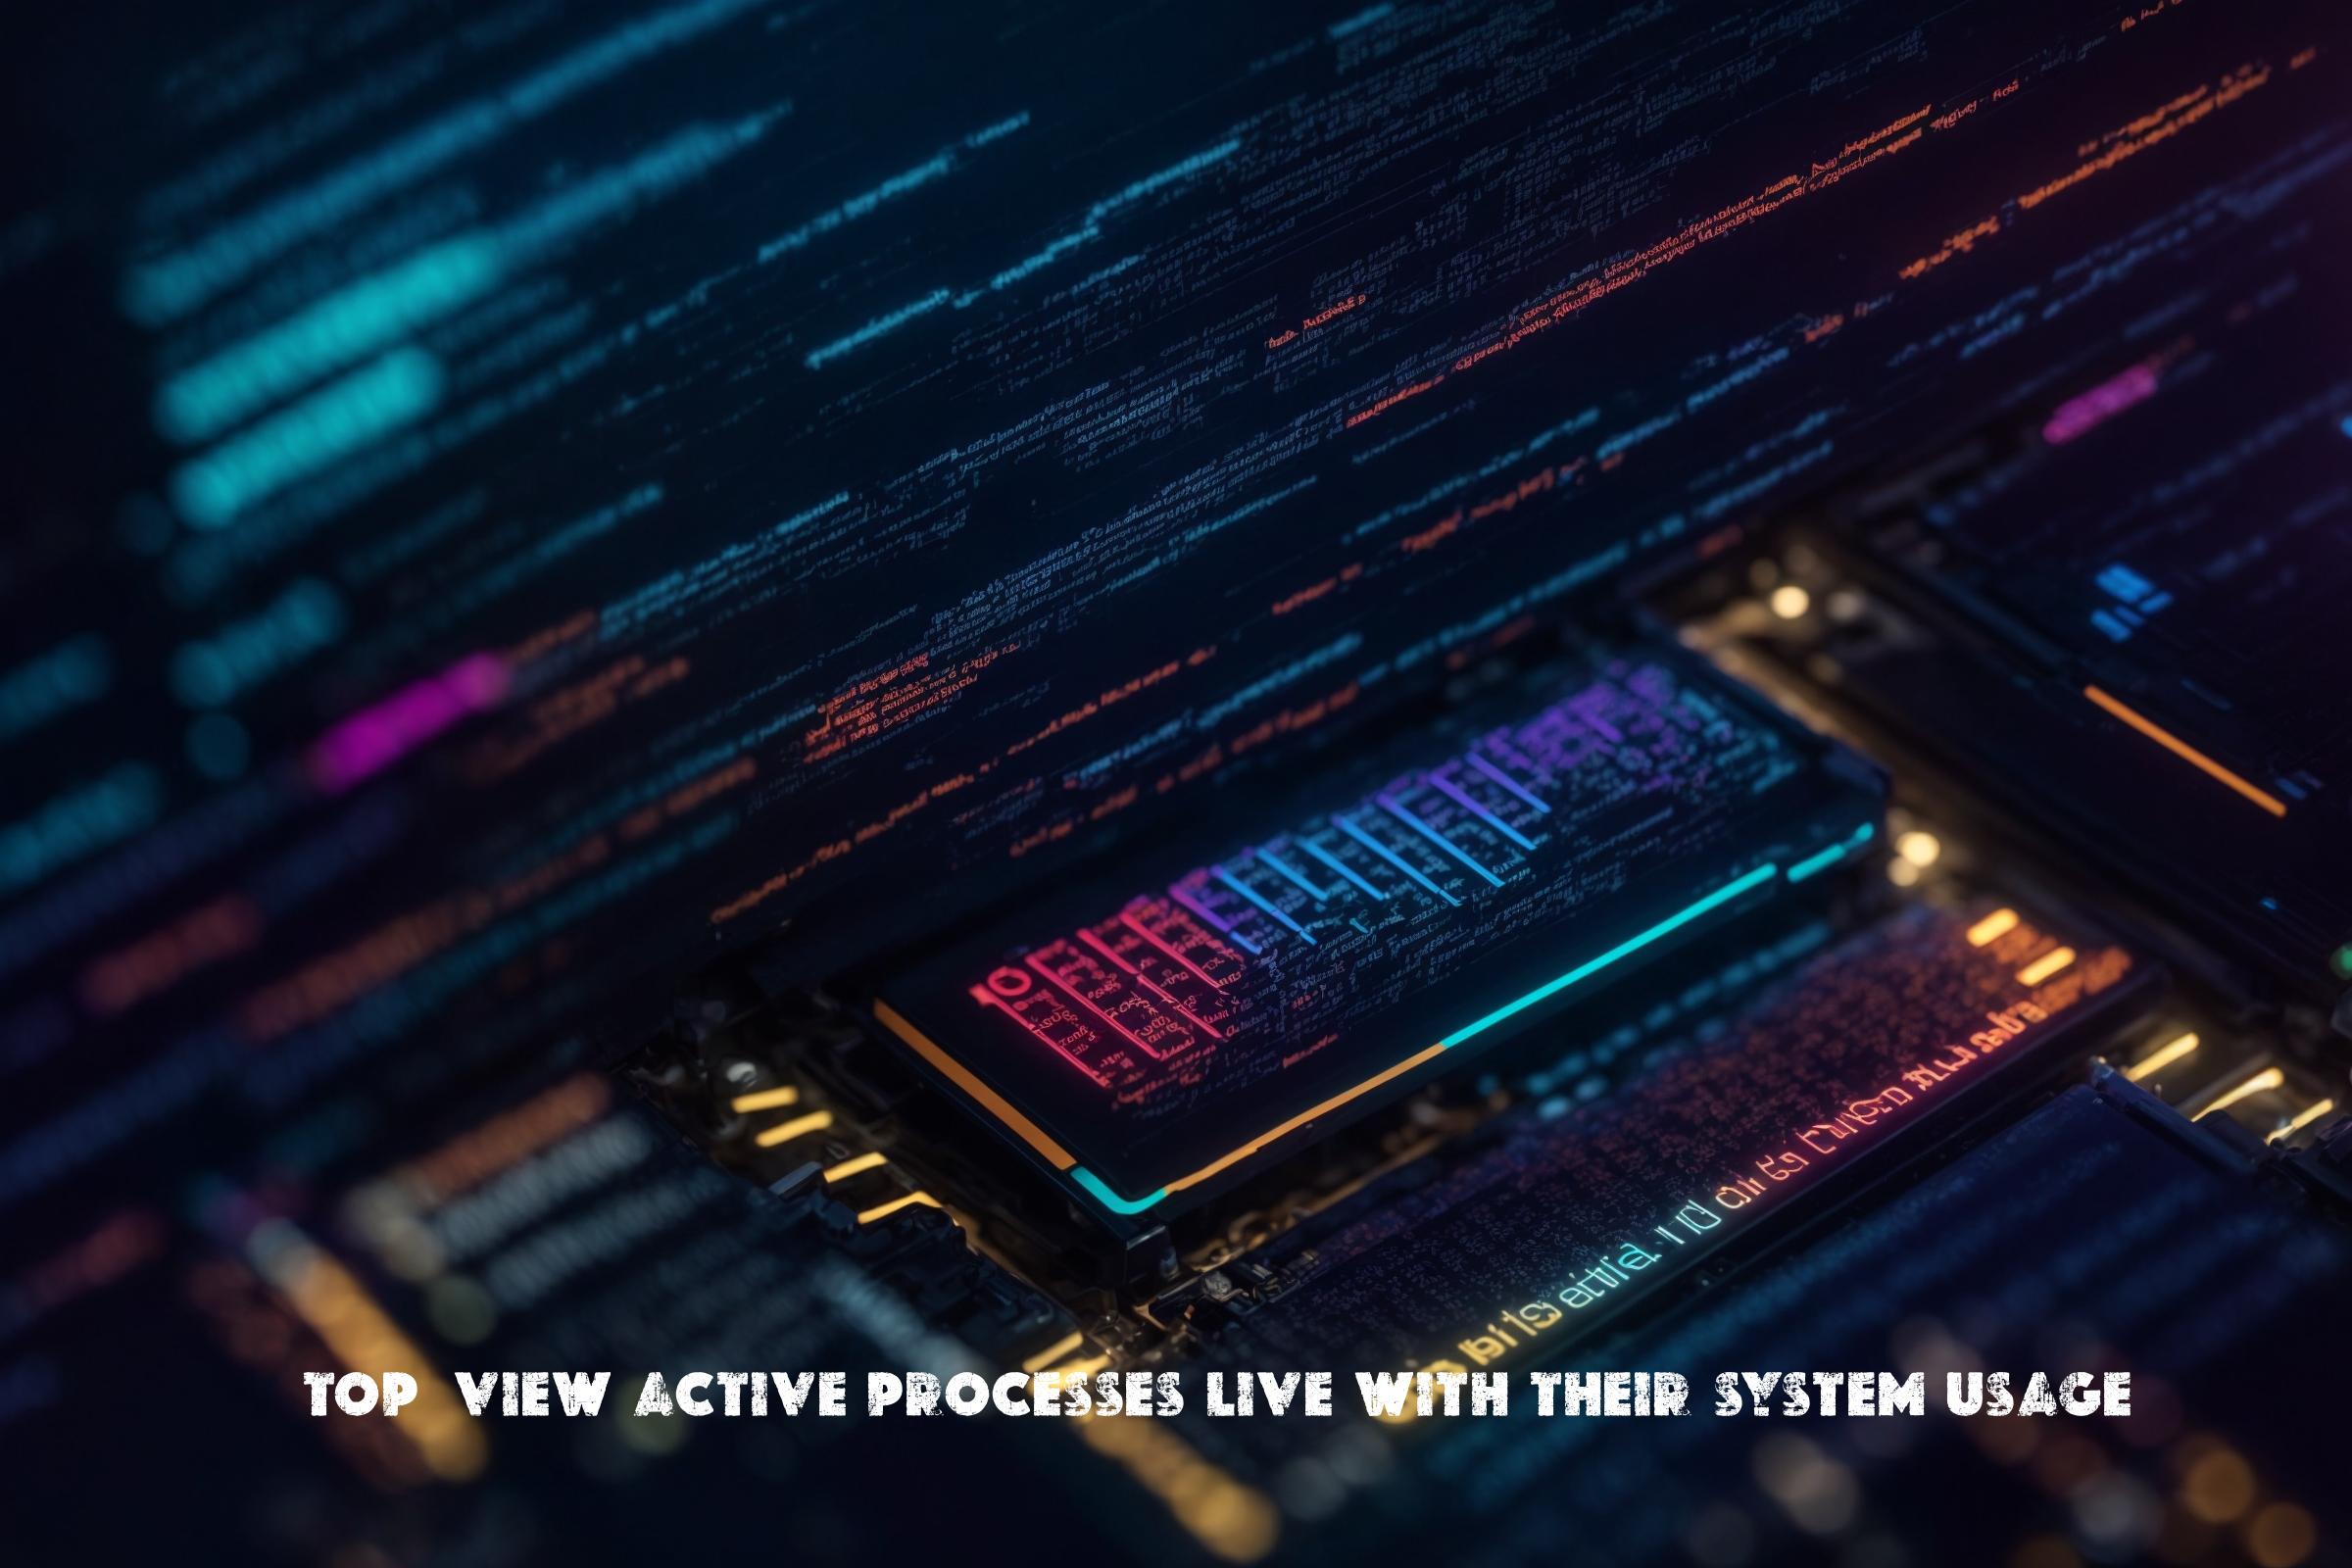 View active processes live with their system usage – a standard system utility top